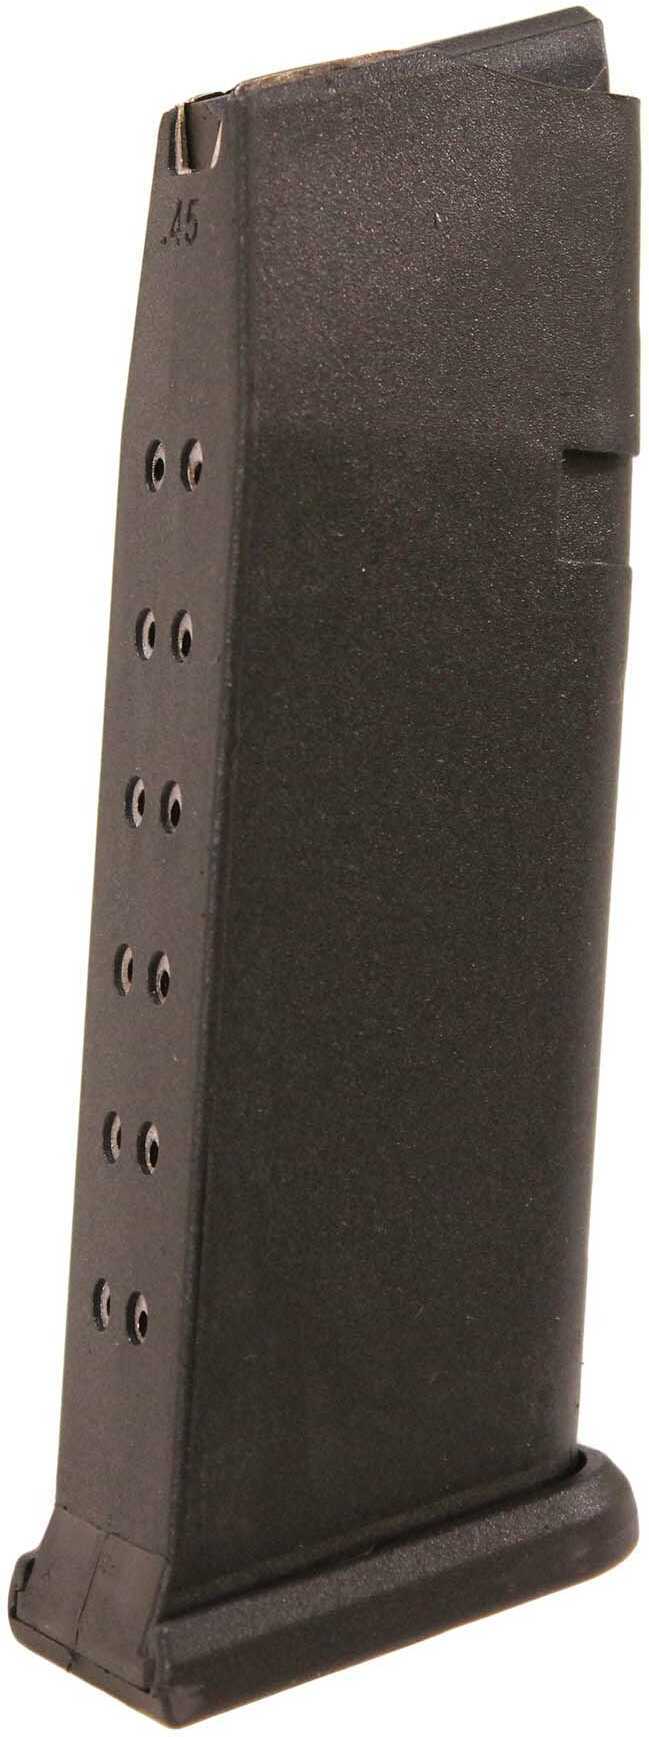 Promag GLKA14 Replacement Magazine for Glock G21 45 Automatic Colt Pistol (ACP) 13 Round Polymer Black Finish